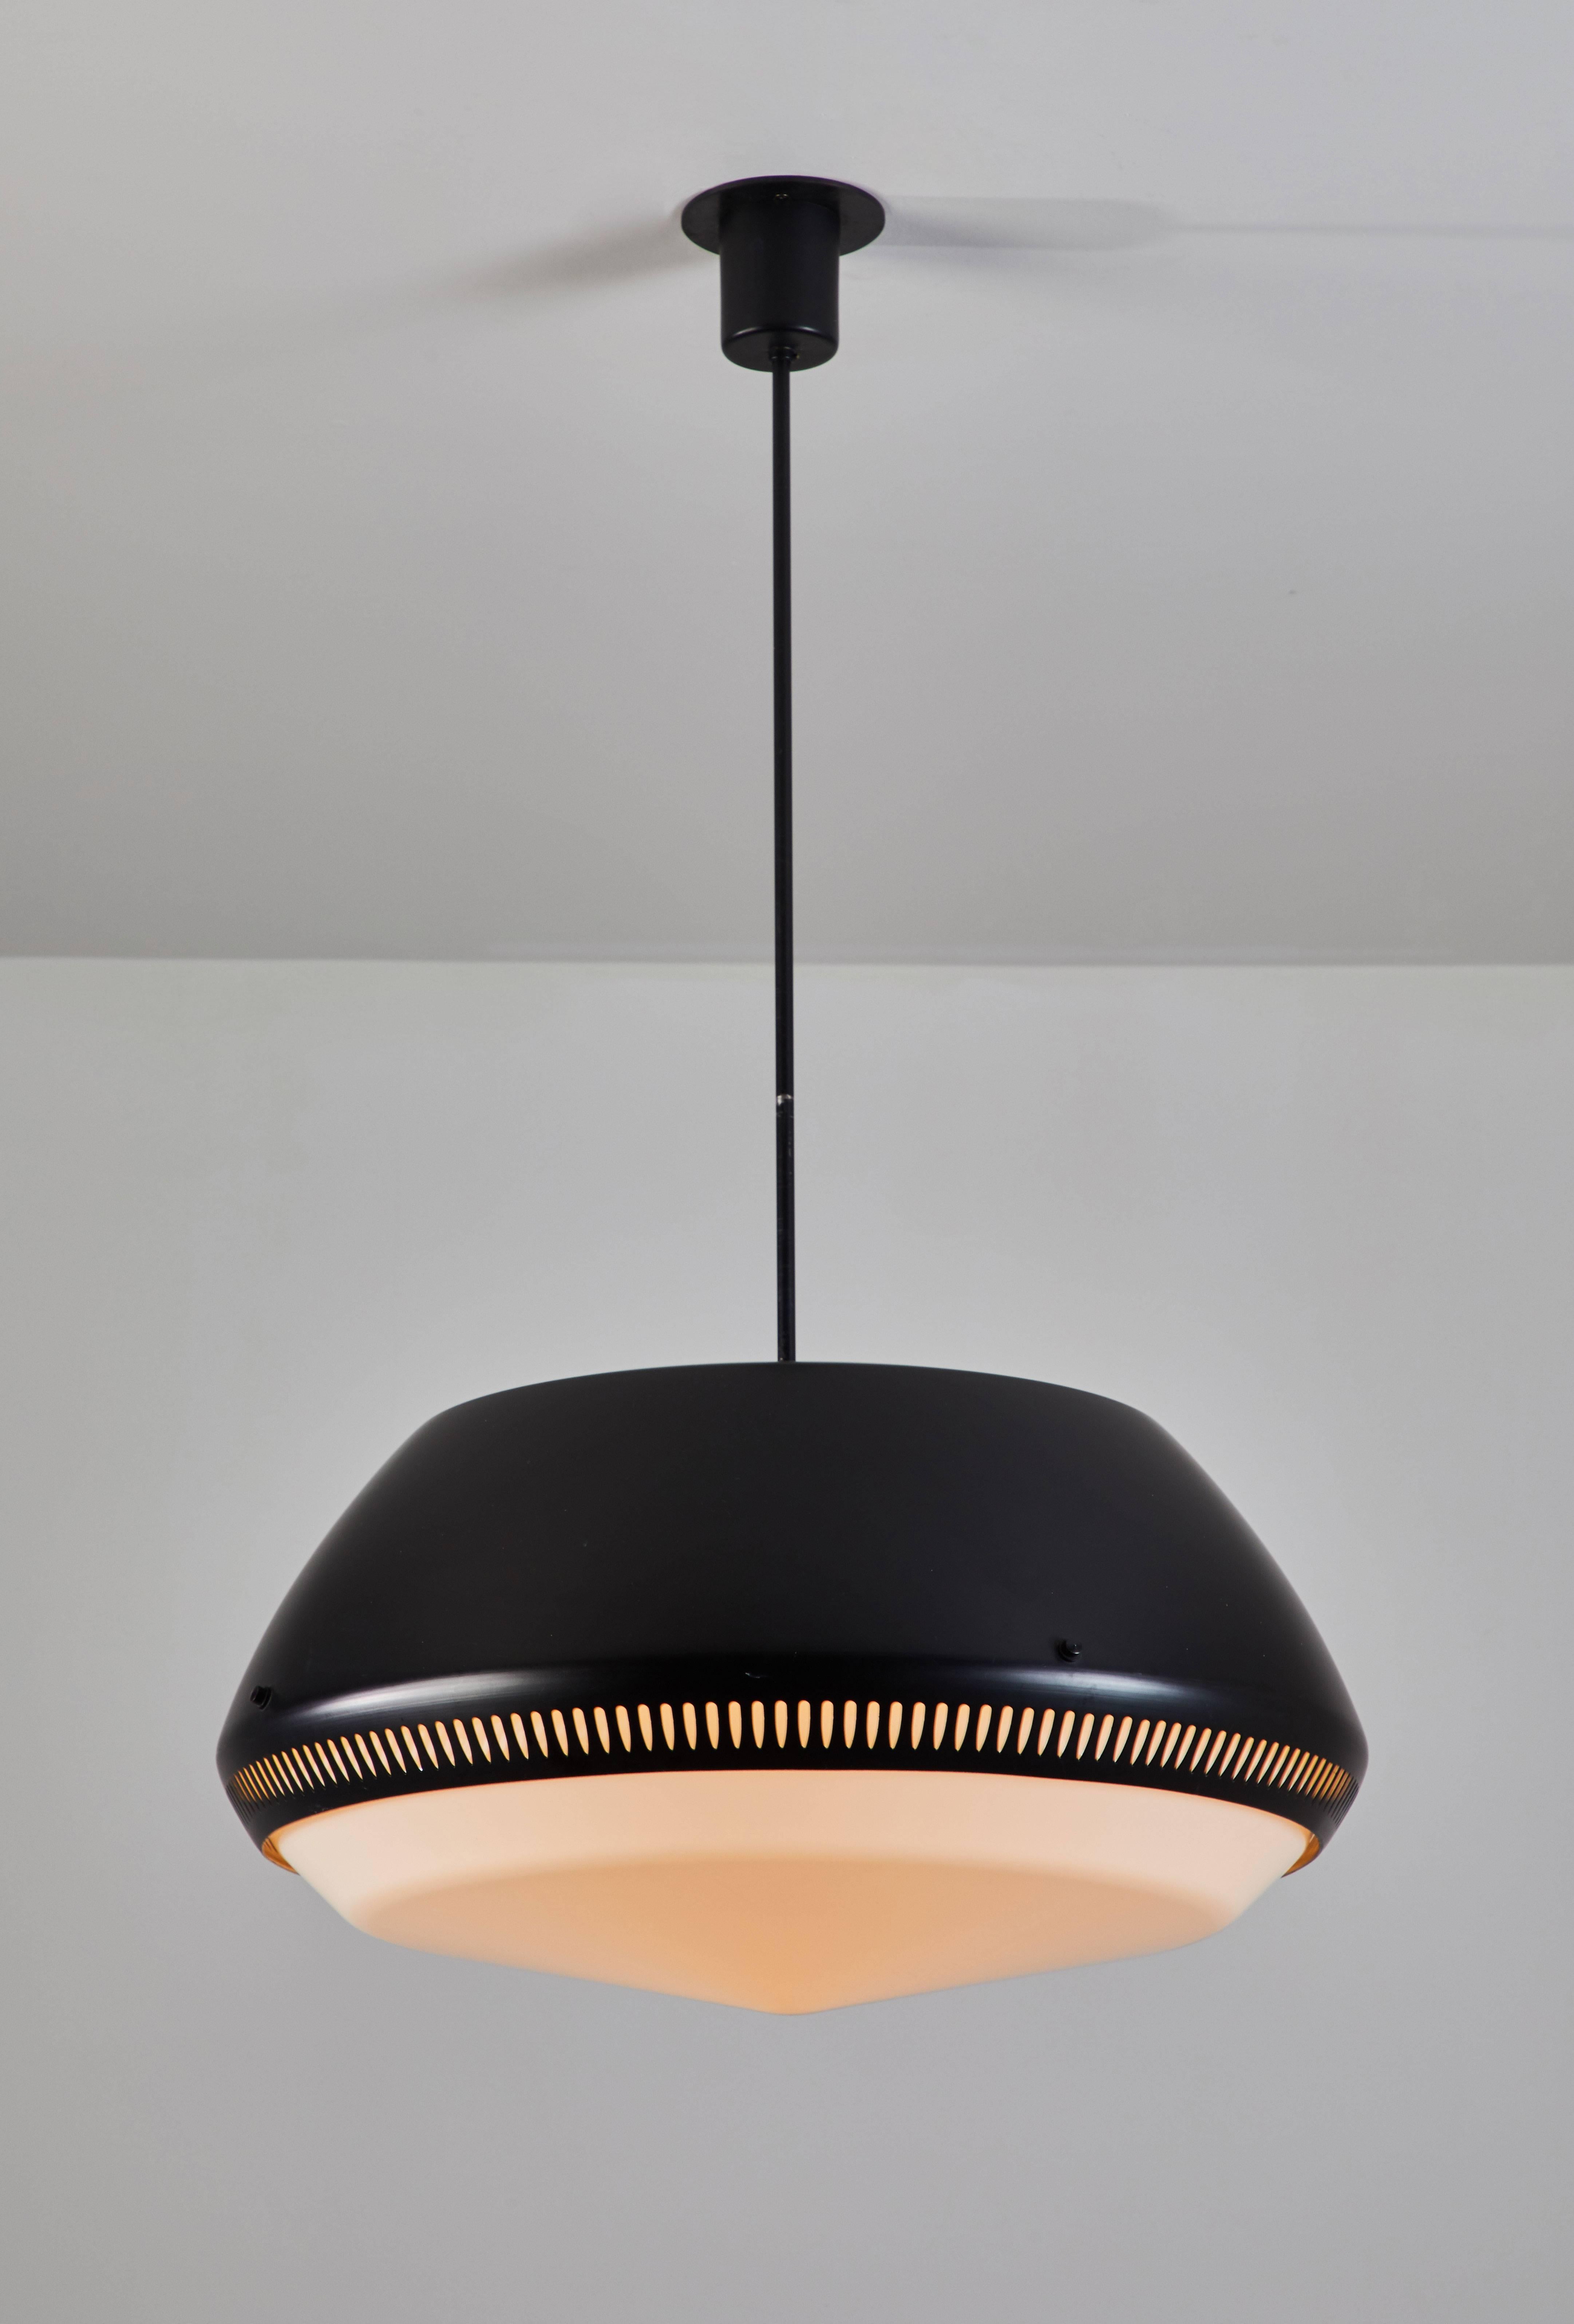 Pendant by Sergio Asti for Arteluce. Designed and manufactured  in Italy, circa 1950's. Lacquered aluminum with white acrylic diffuser. Rewired for US junction boxes. Takes one E27 100w maximum bulb. Overall drop can be adjusted.